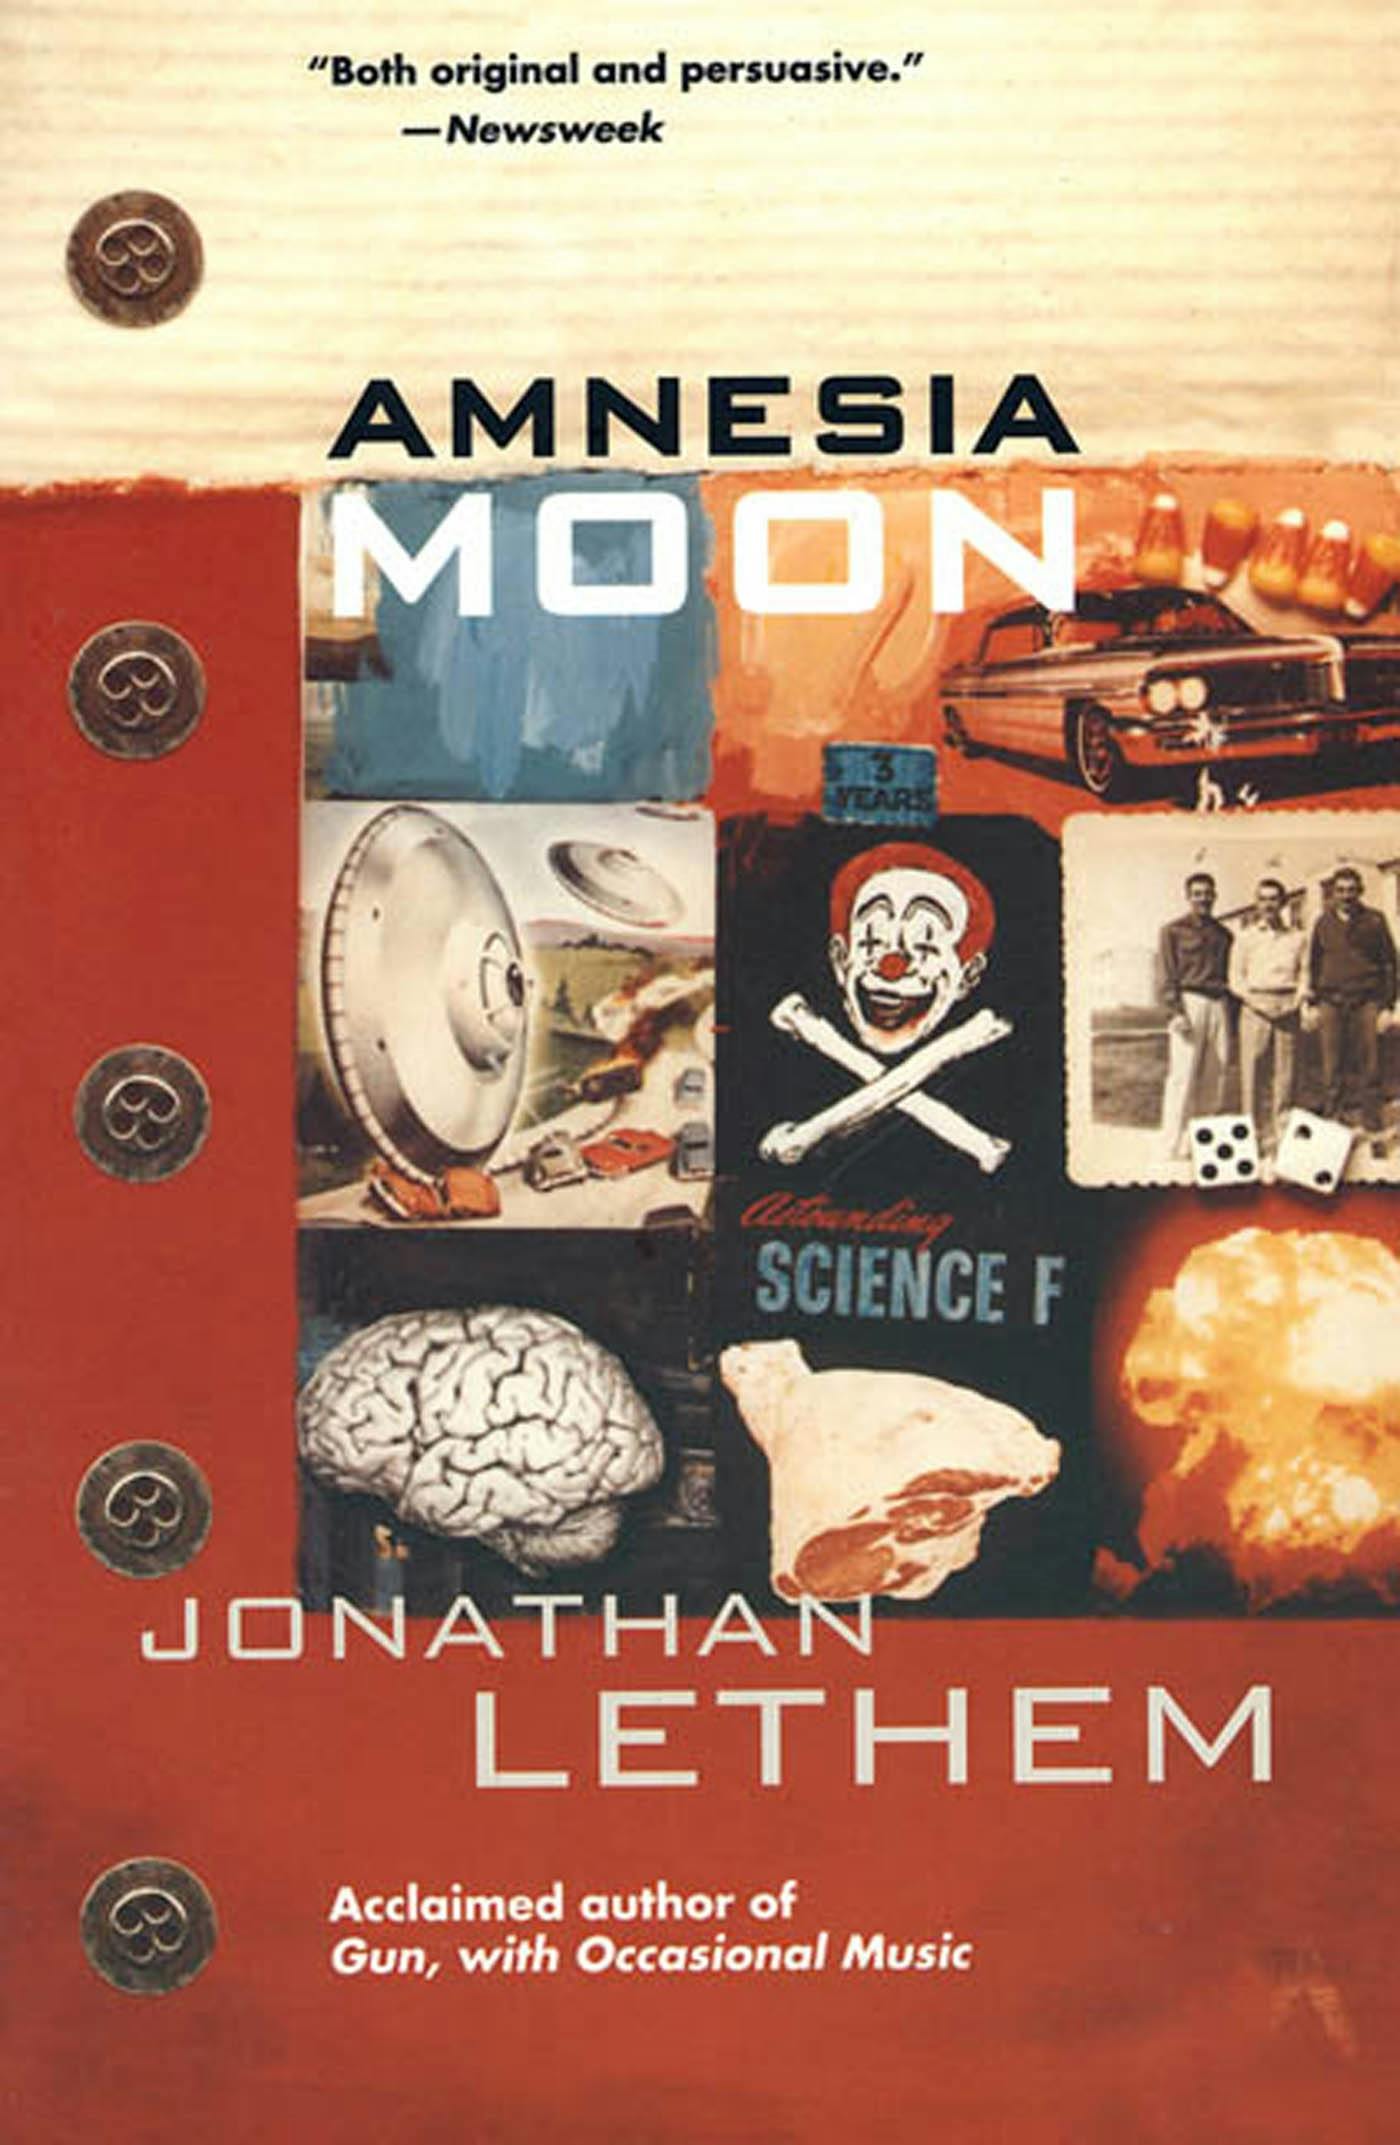 Cover for the book titled as: Amnesia Moon